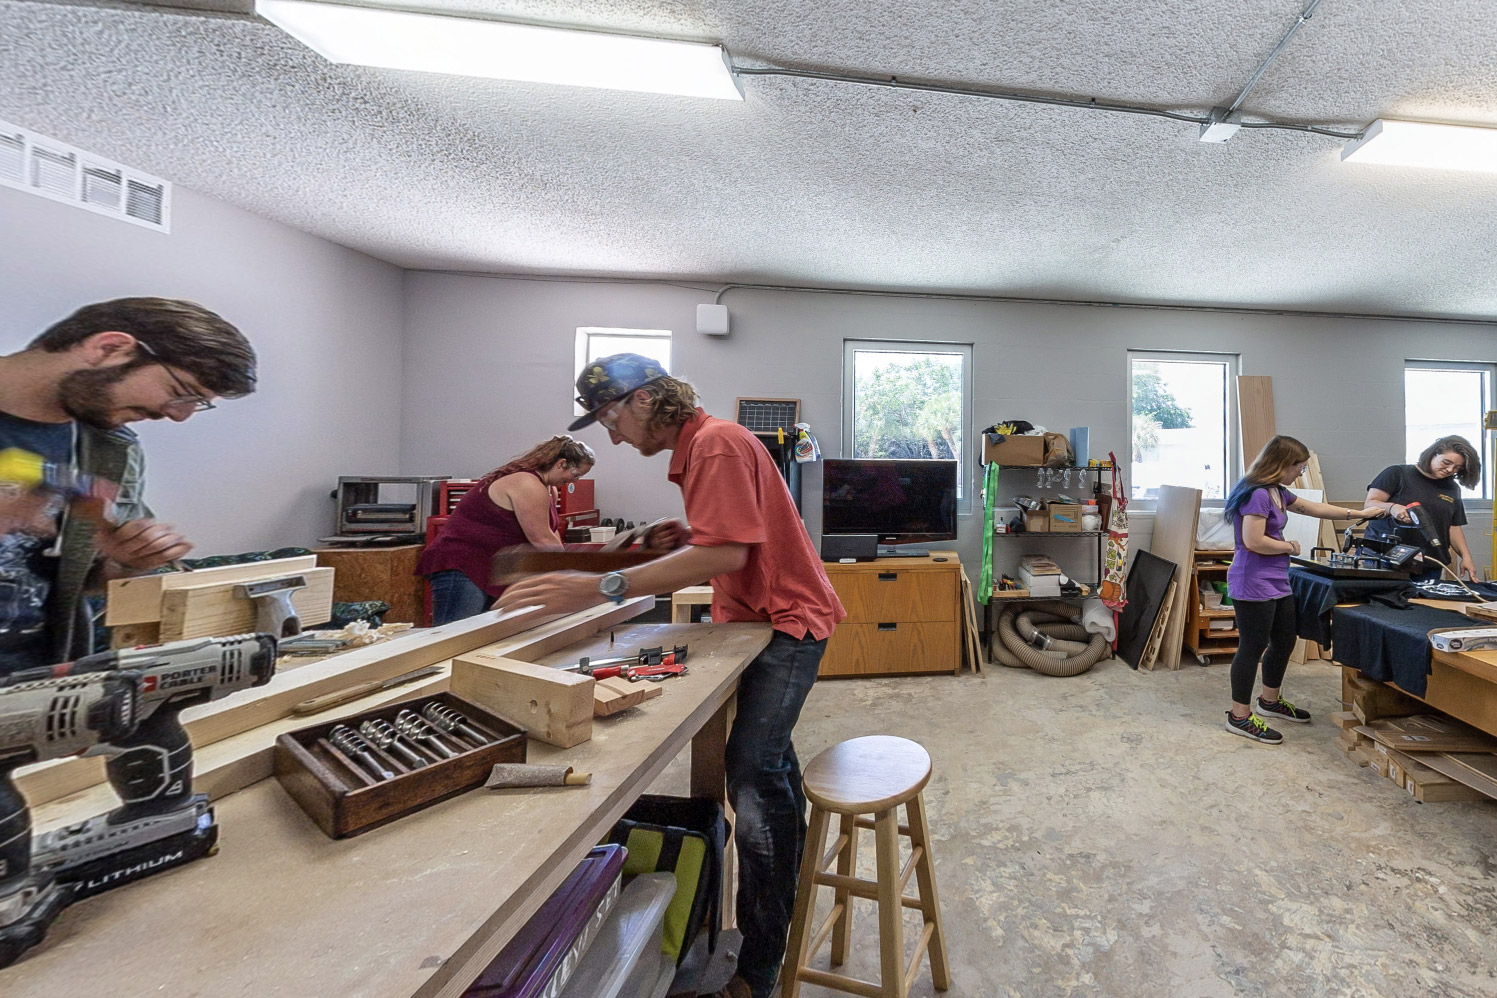 Students manufacture things in the MakerSpace at Eckerd College